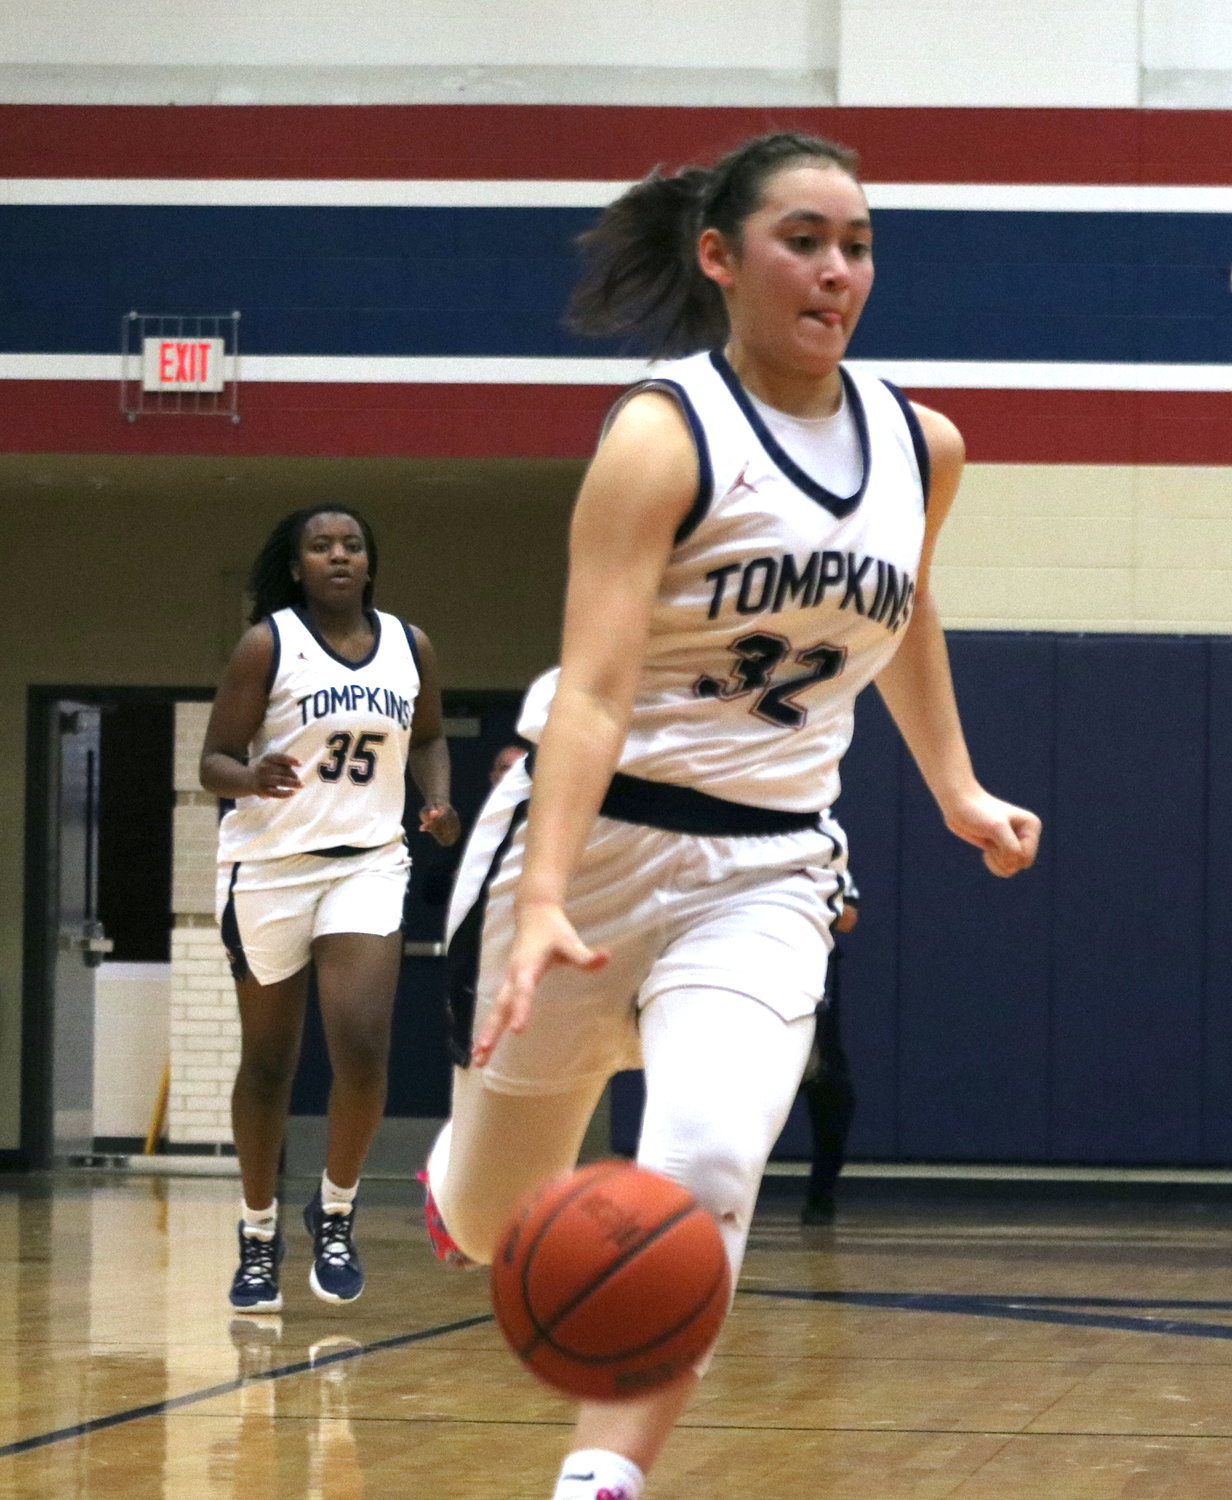 Rihanna DeLeon dribbles up the court during Friday’s game between Tompkins and Cinco Ranch at the Tompkins gym.